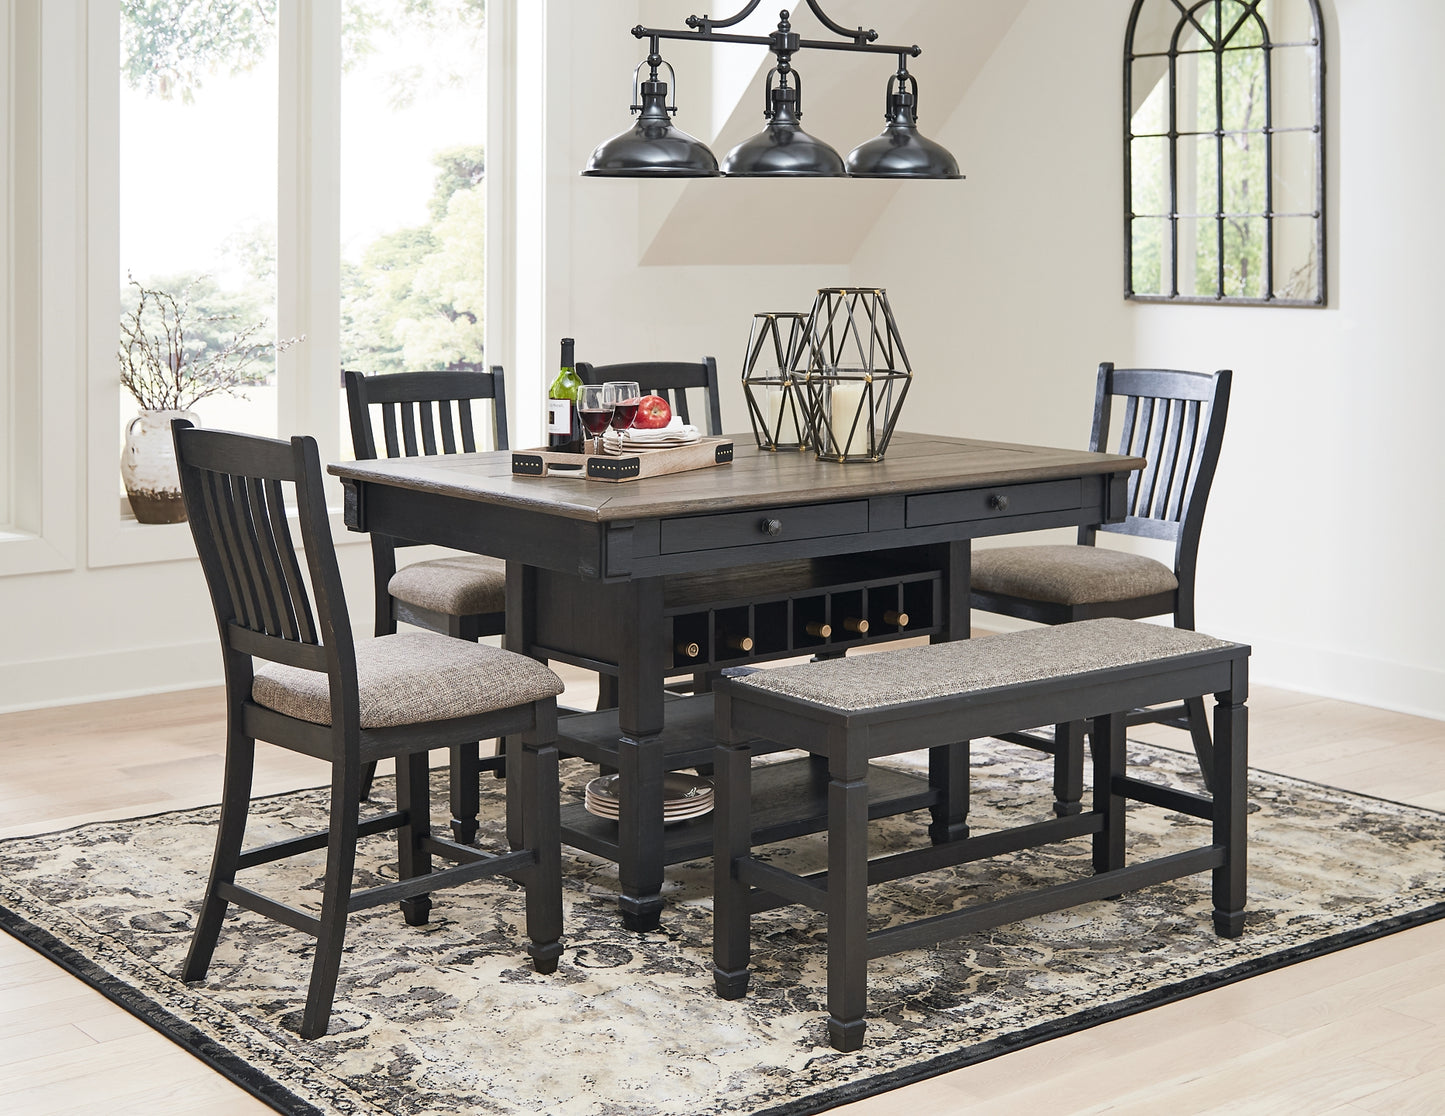 Tyler Creek Counter Height Dining Table and 4 Barstools and Bench Wilson Furniture (OH)  in Bridgeport, Ohio. Serving Moundsville, Richmond, Smithfield, Cadiz, & St. Clairesville